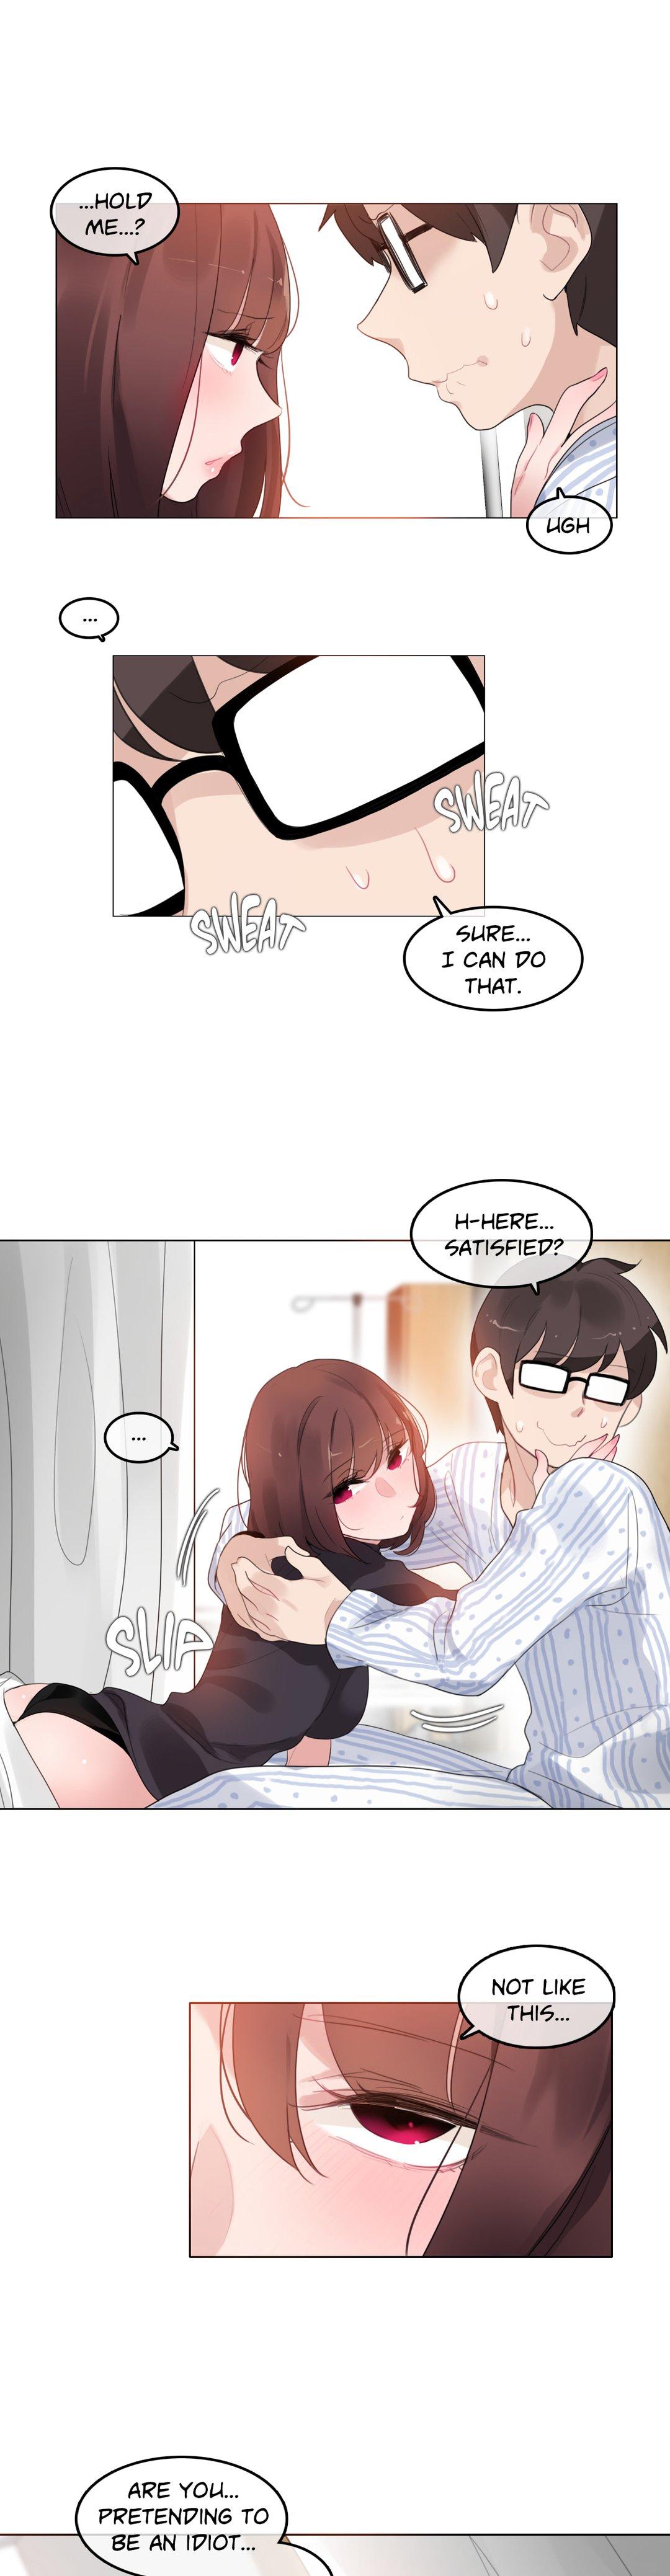 A Pervert's Daily Life • Chapter 46-50 85